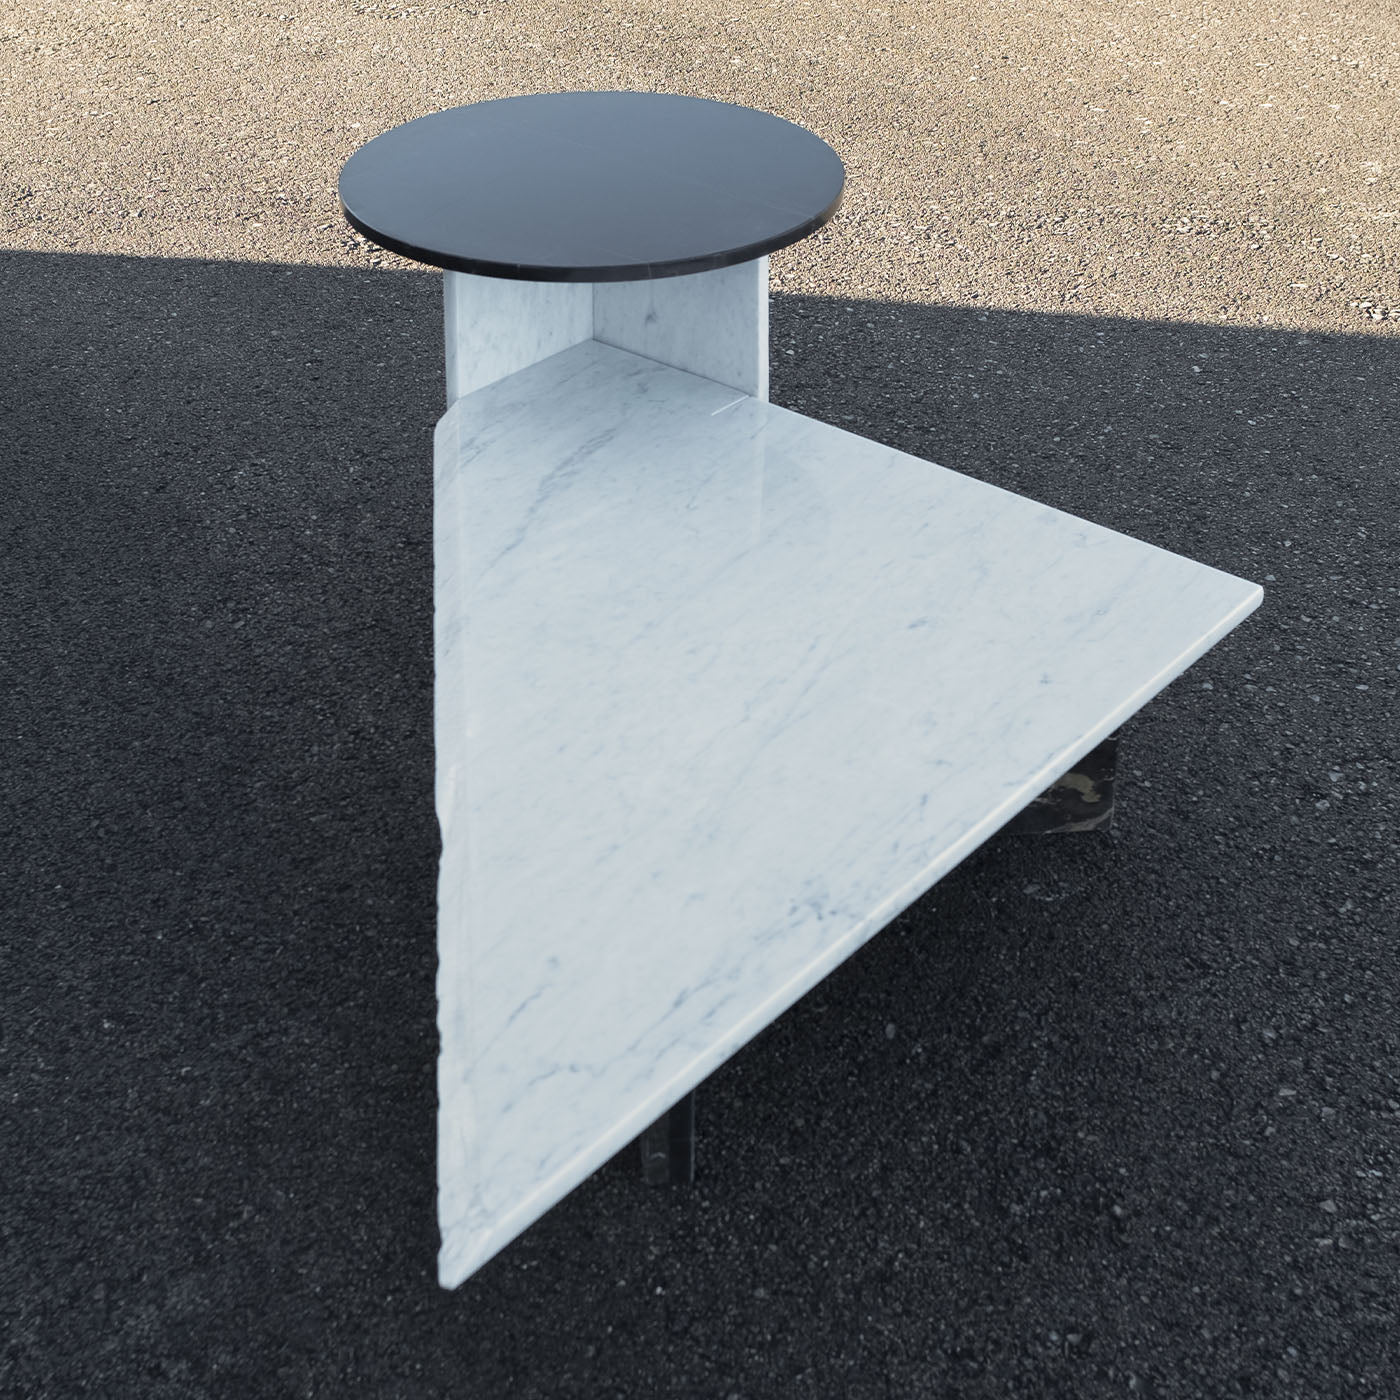 SST014 Carrara and Marquinia Marble Low Tables - Alternative view 3